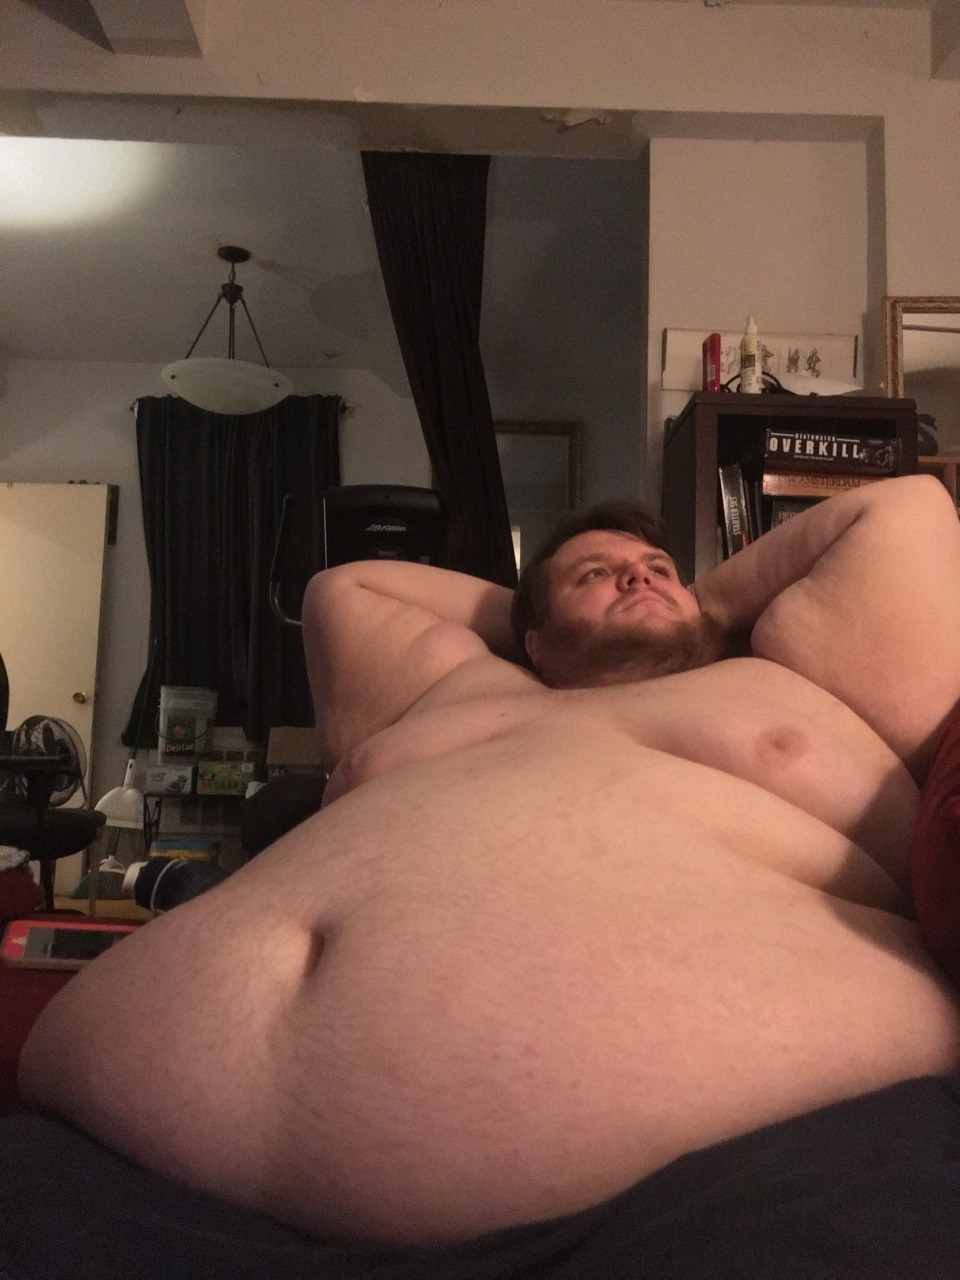 fatbestfriend:   Can you guess my sexy secret? 😉  I’m filled with thousands